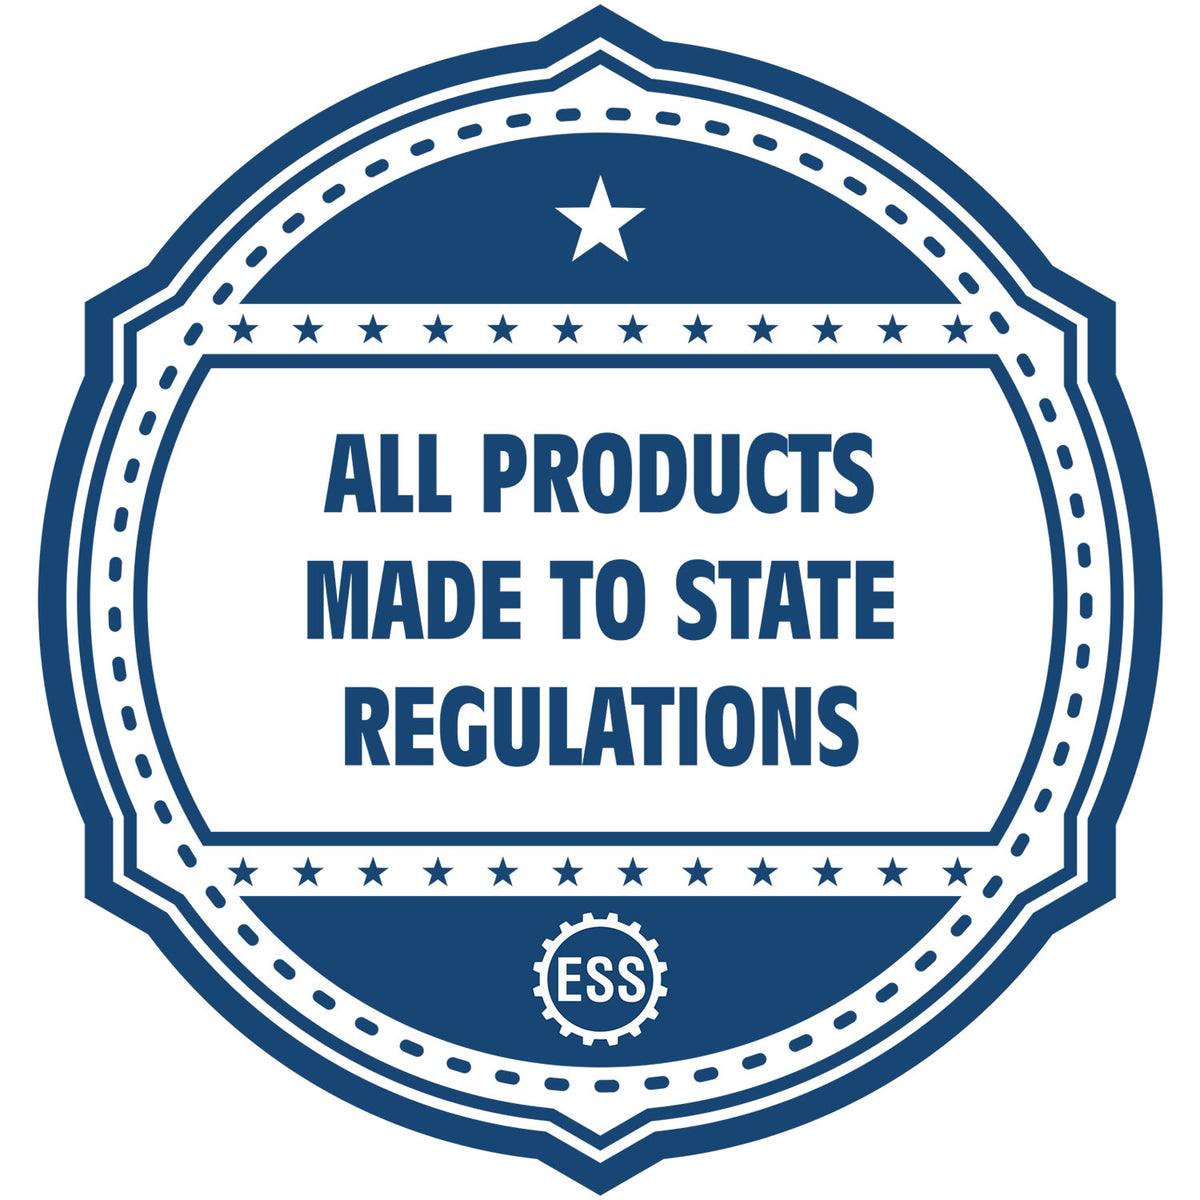 An icon or badge element for the Self-Inking State Seal Massachusetts Notary Stamp showing that this product is made in compliance with state regulations.